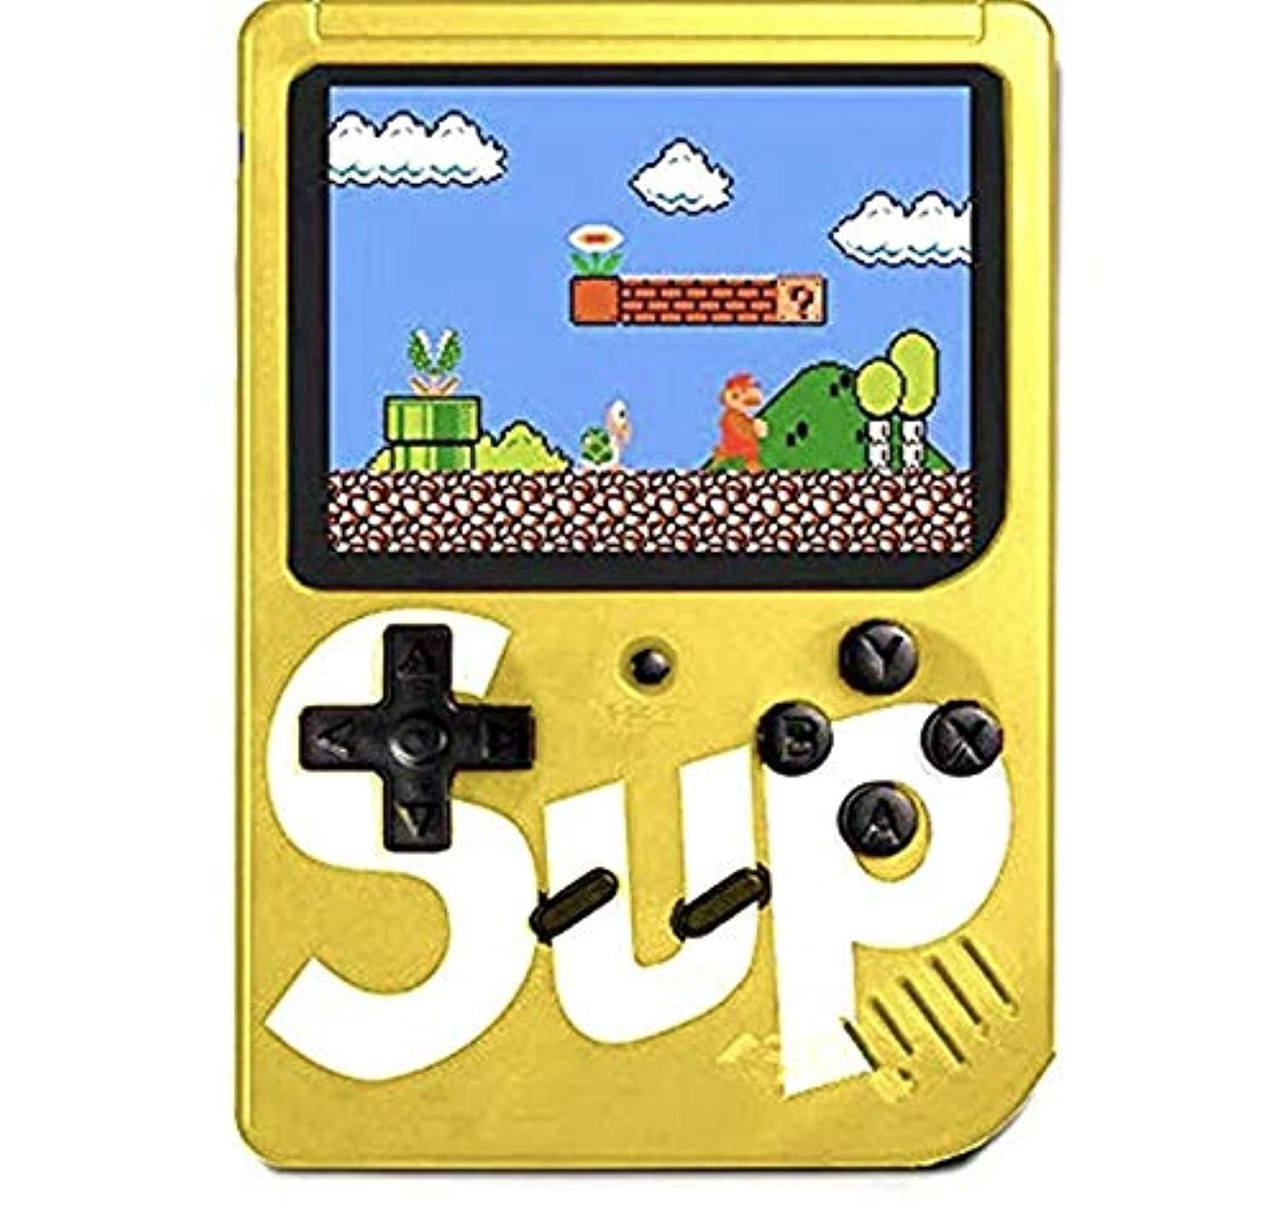 Sup Retro Game Box 400 in 1 - Gaming Console